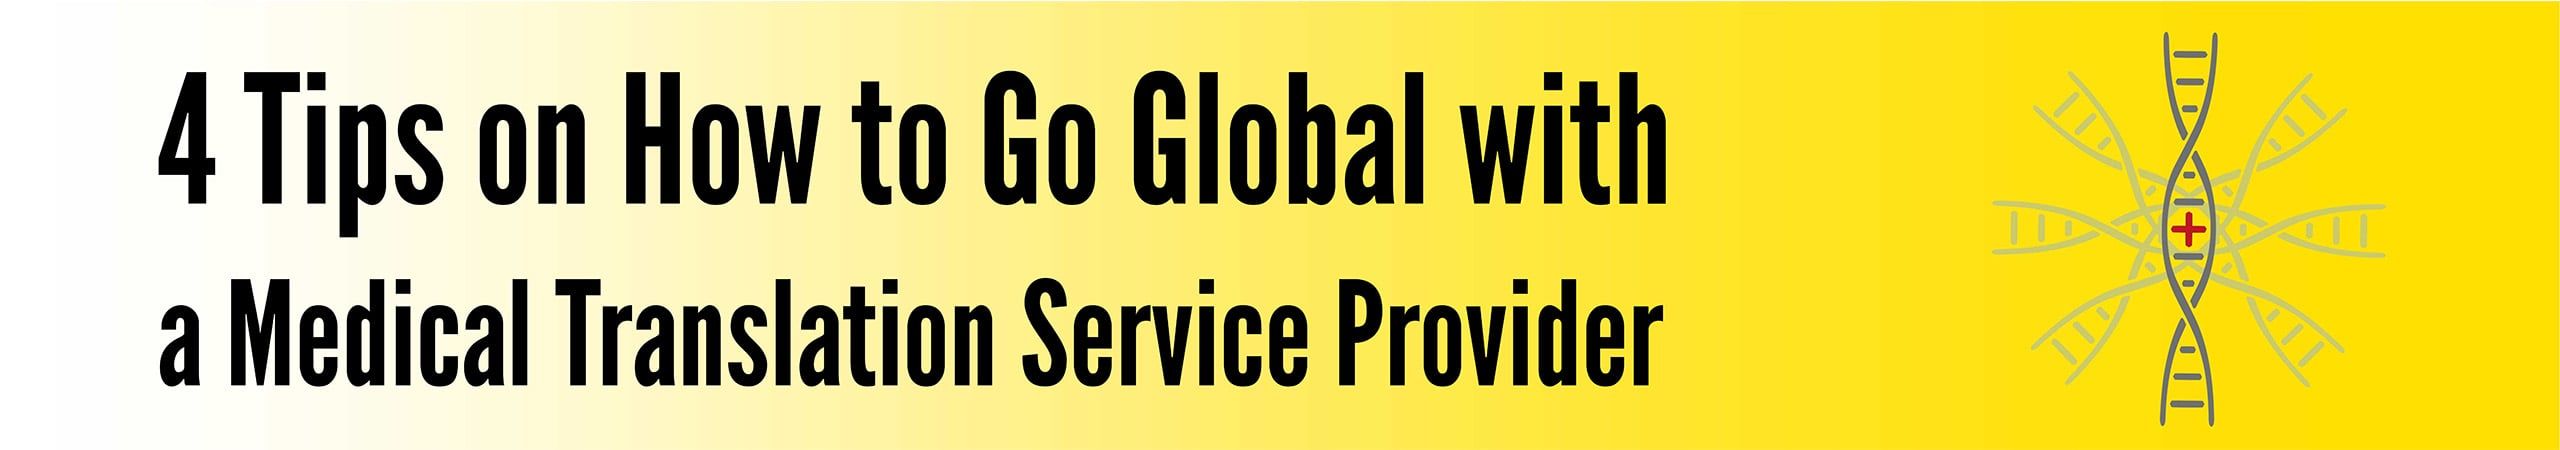 4 Tips on How to Go Global with a Medical Translation Service Provider